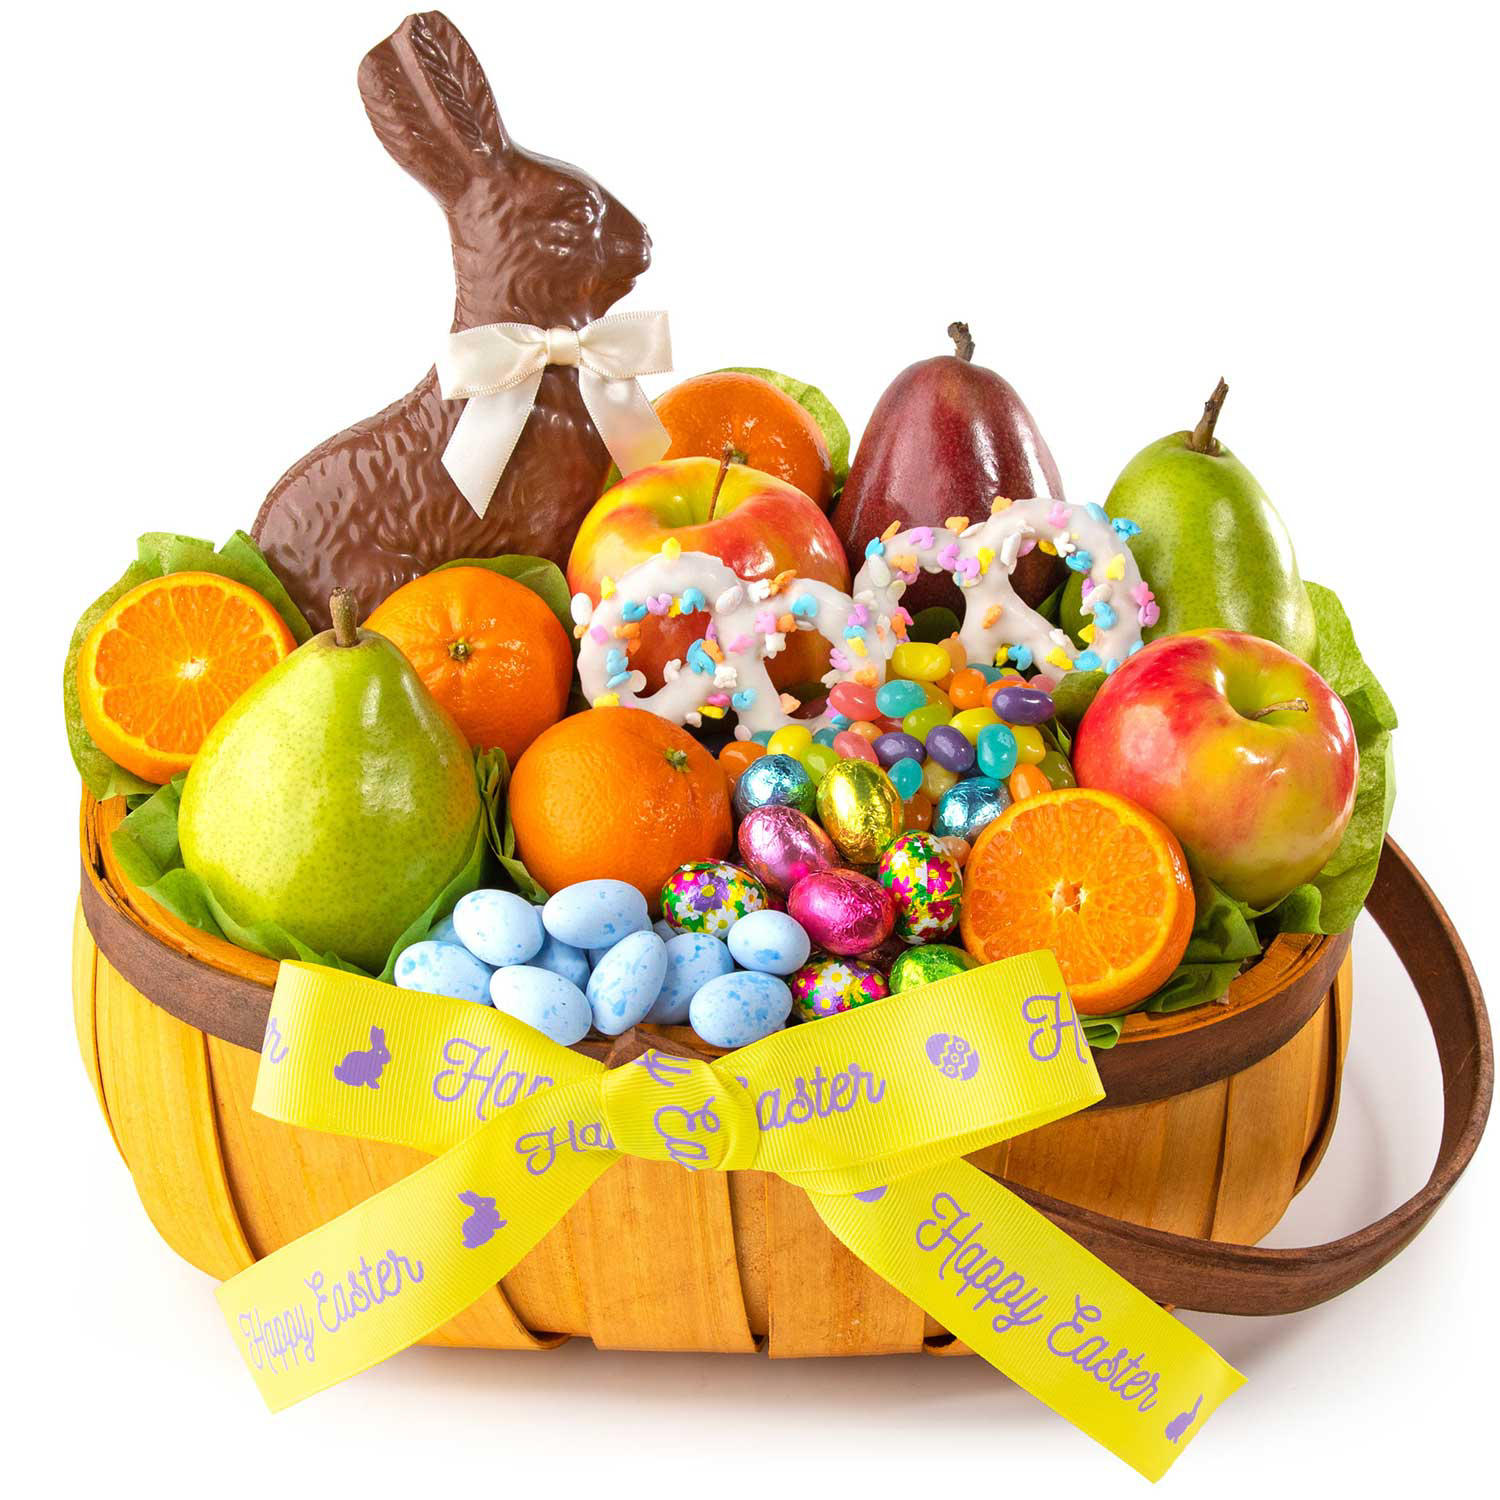 Golden State Fruit and Treats Family Easter Basket